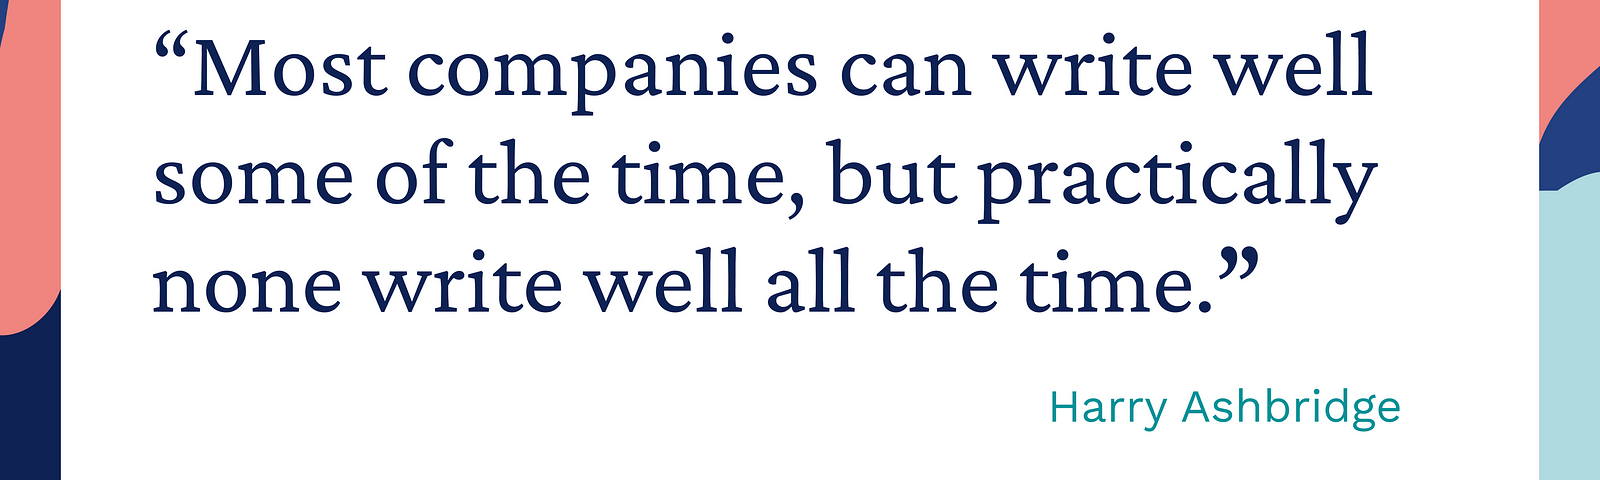 Most companies can write well some of the time, but practically none write well all the time